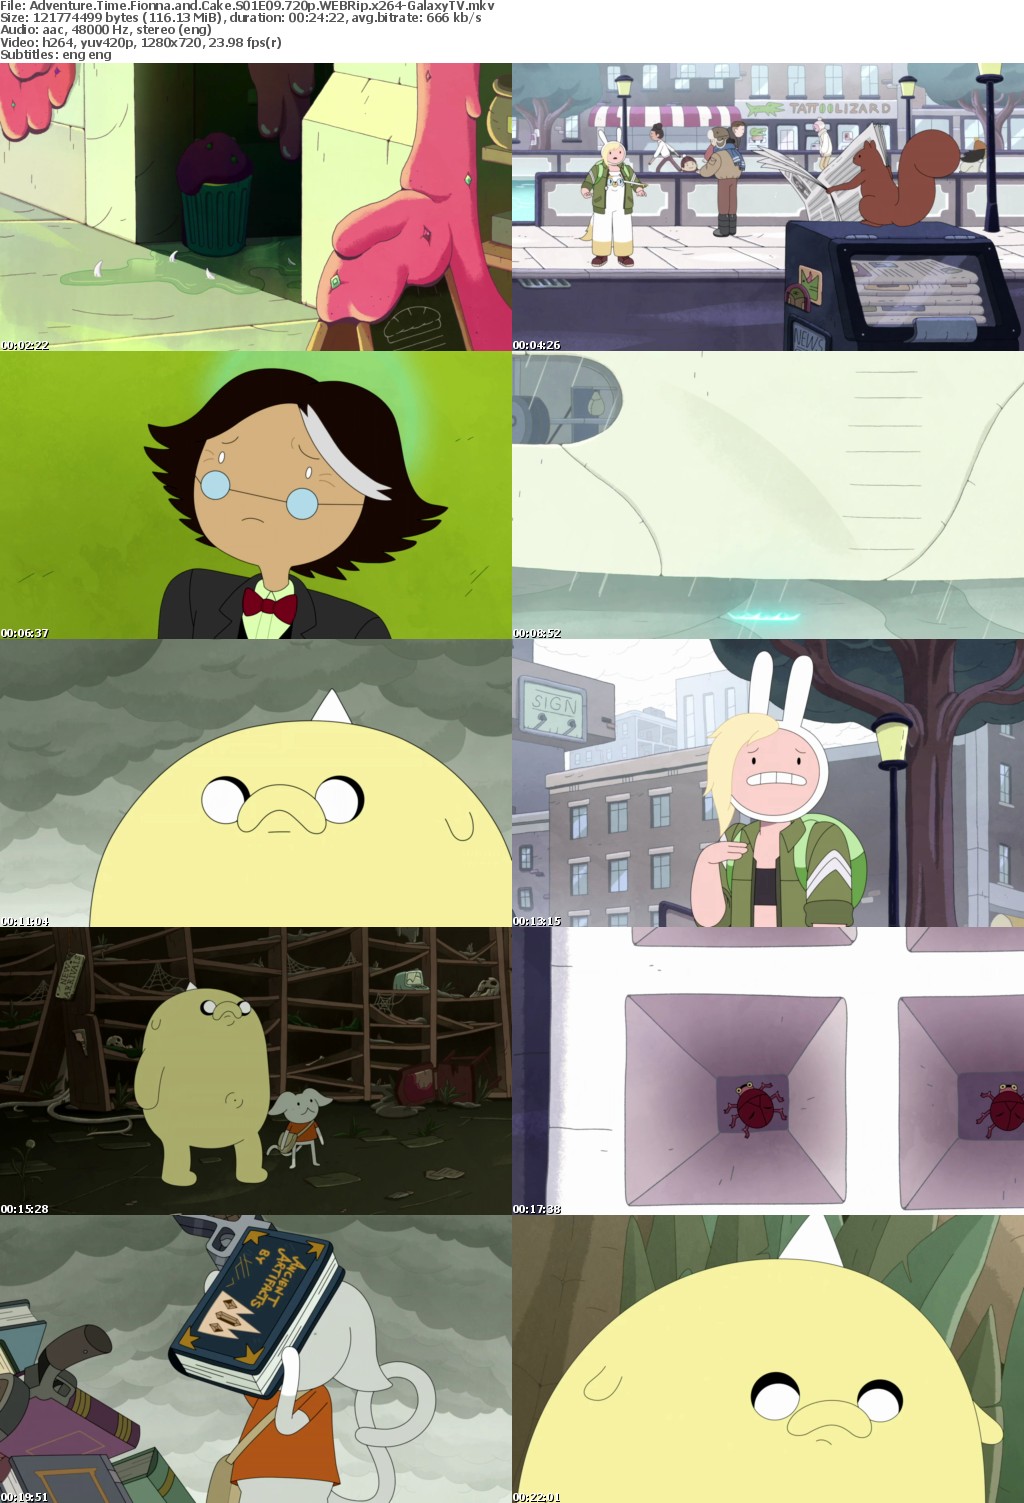 Adventure Time Fionna and Cake S01 COMPLETE 720p WEBRip x264-GalaxyTV